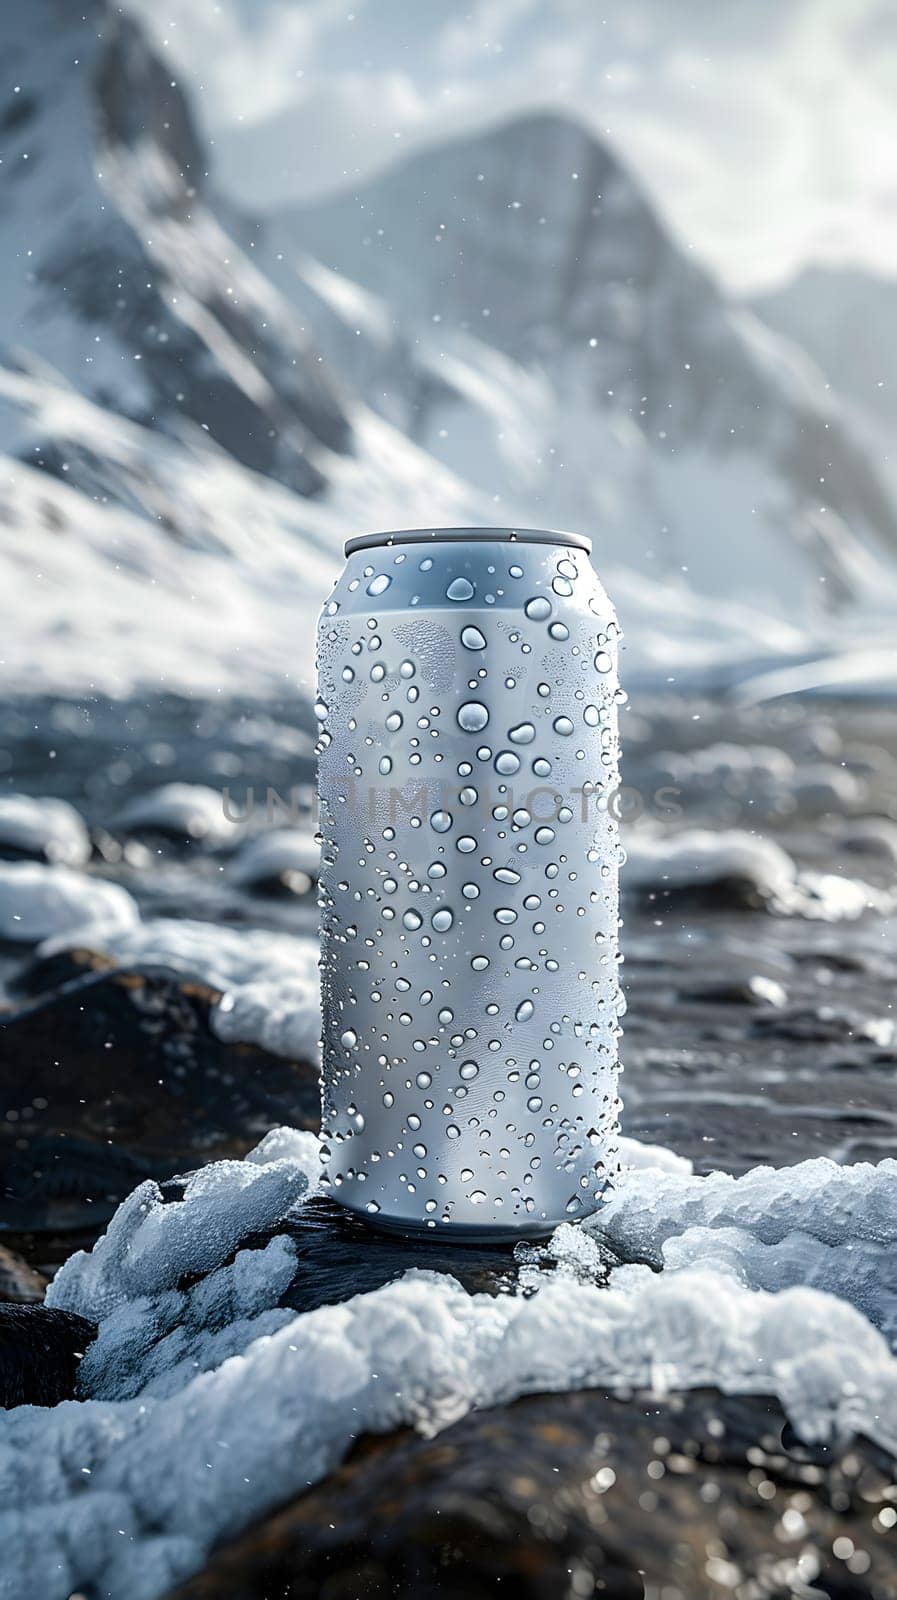 A can of soda is perched on a snowy rock near a mountain, surrounded by icy fluid. The freezing temperatures create a contrast between the cold atmosphere and the refreshing drink inside